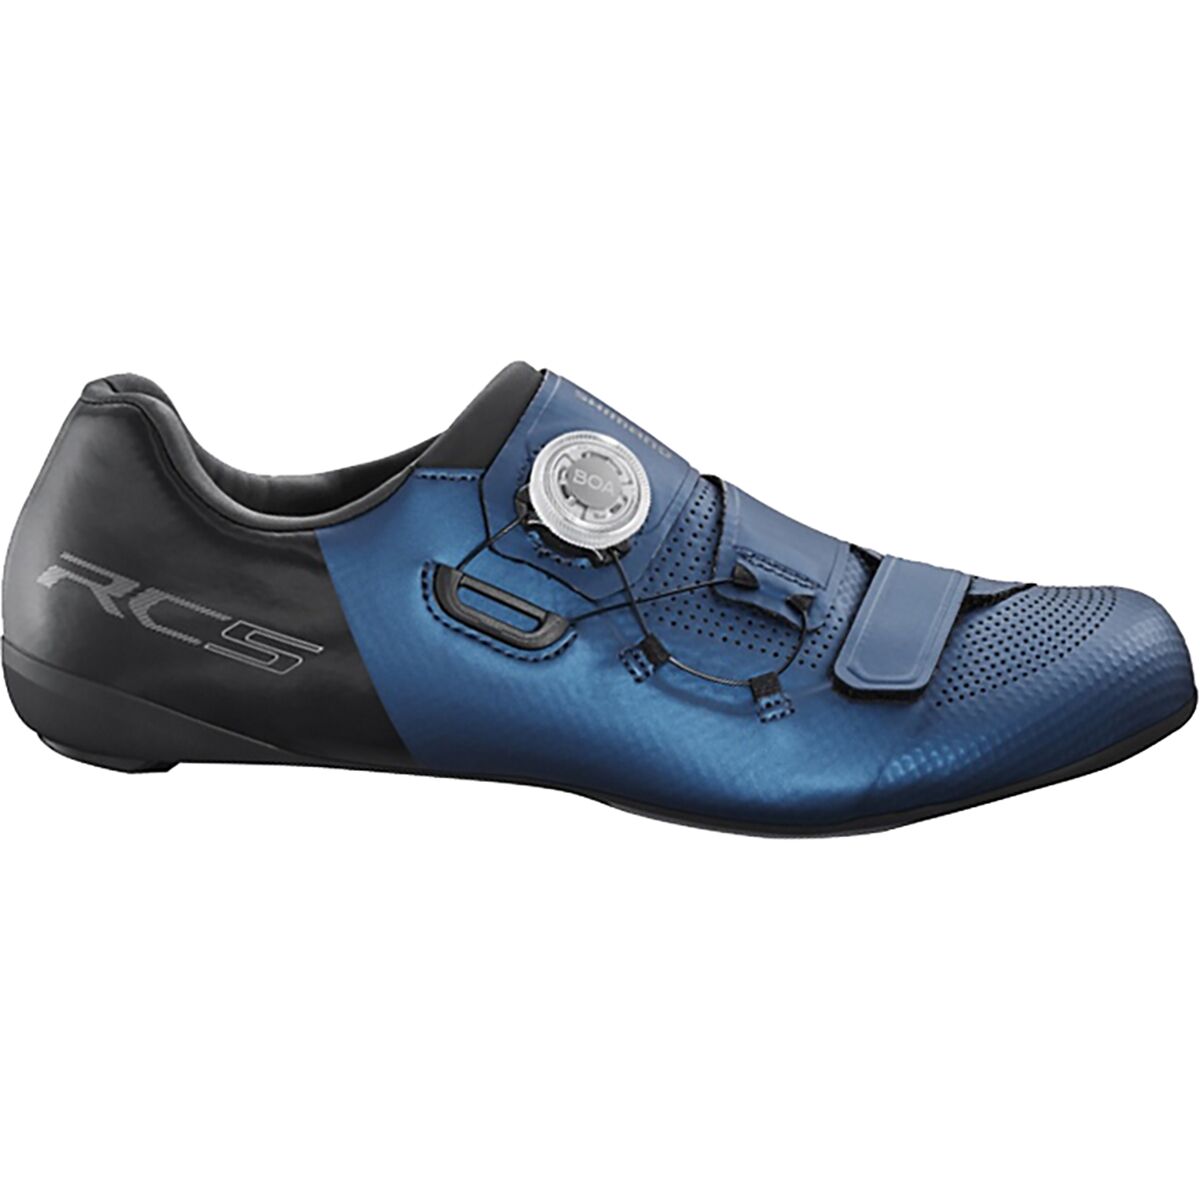 Shimano RC502 Limited Edition Cycling Shoe - Men's Blue 50.0